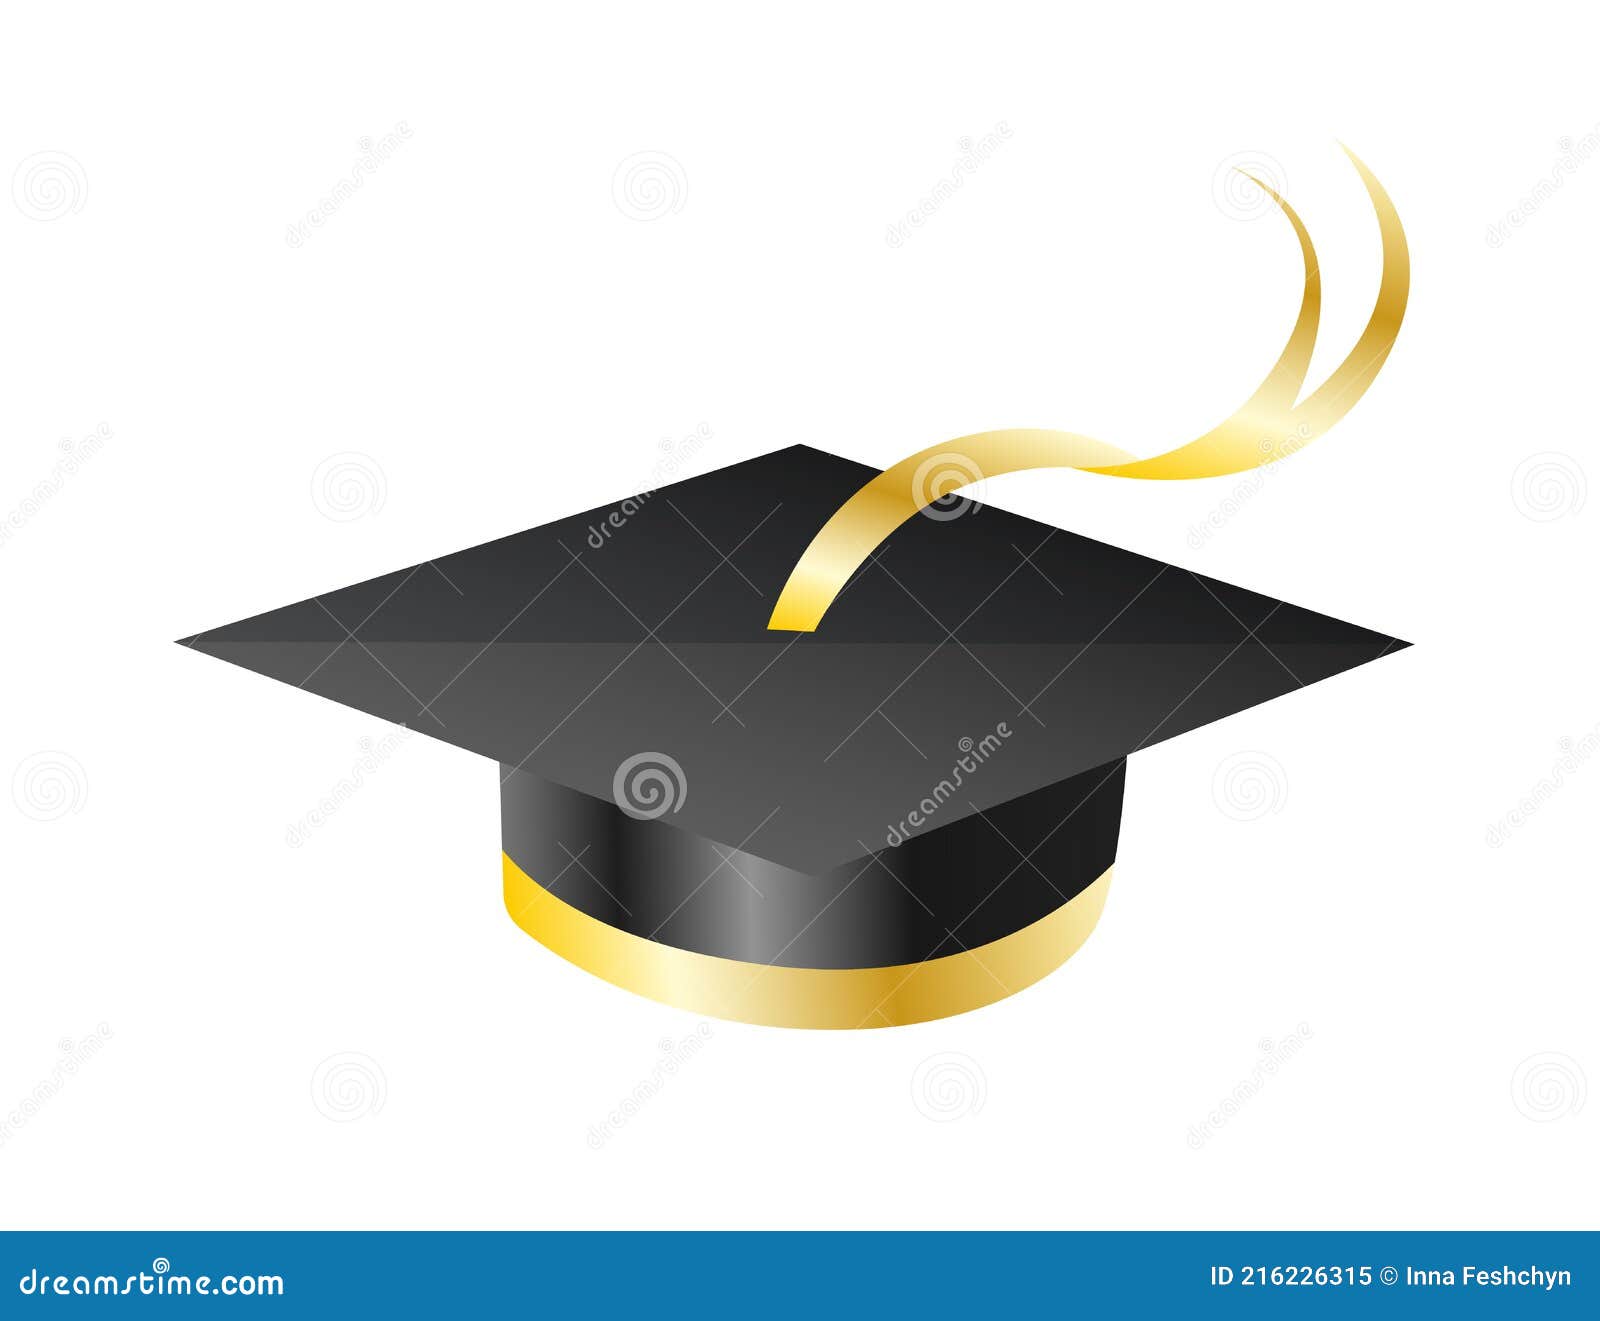 Graduation Cap. Element for Degree Ceremony and Educational Programs ...